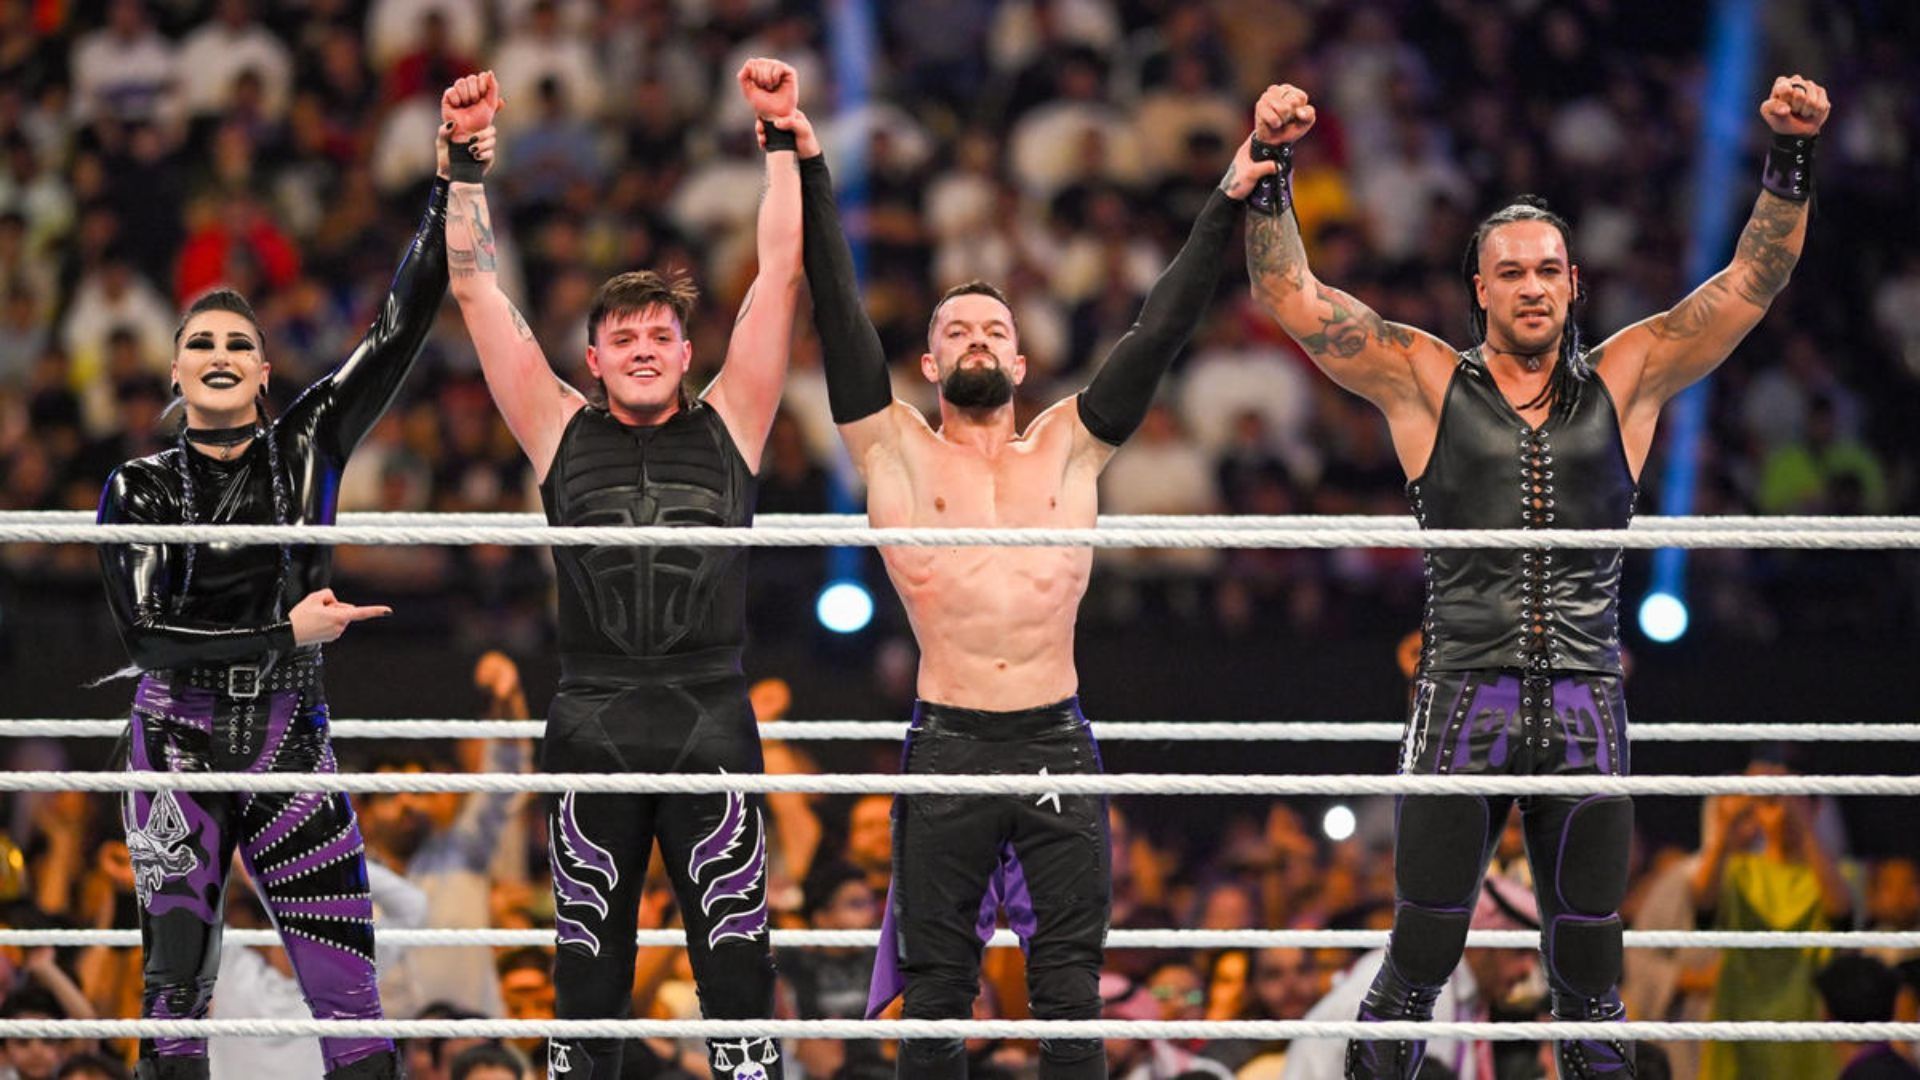 The Judgment Day celebrating a win against The O.C. Image Credits: wwe.com 